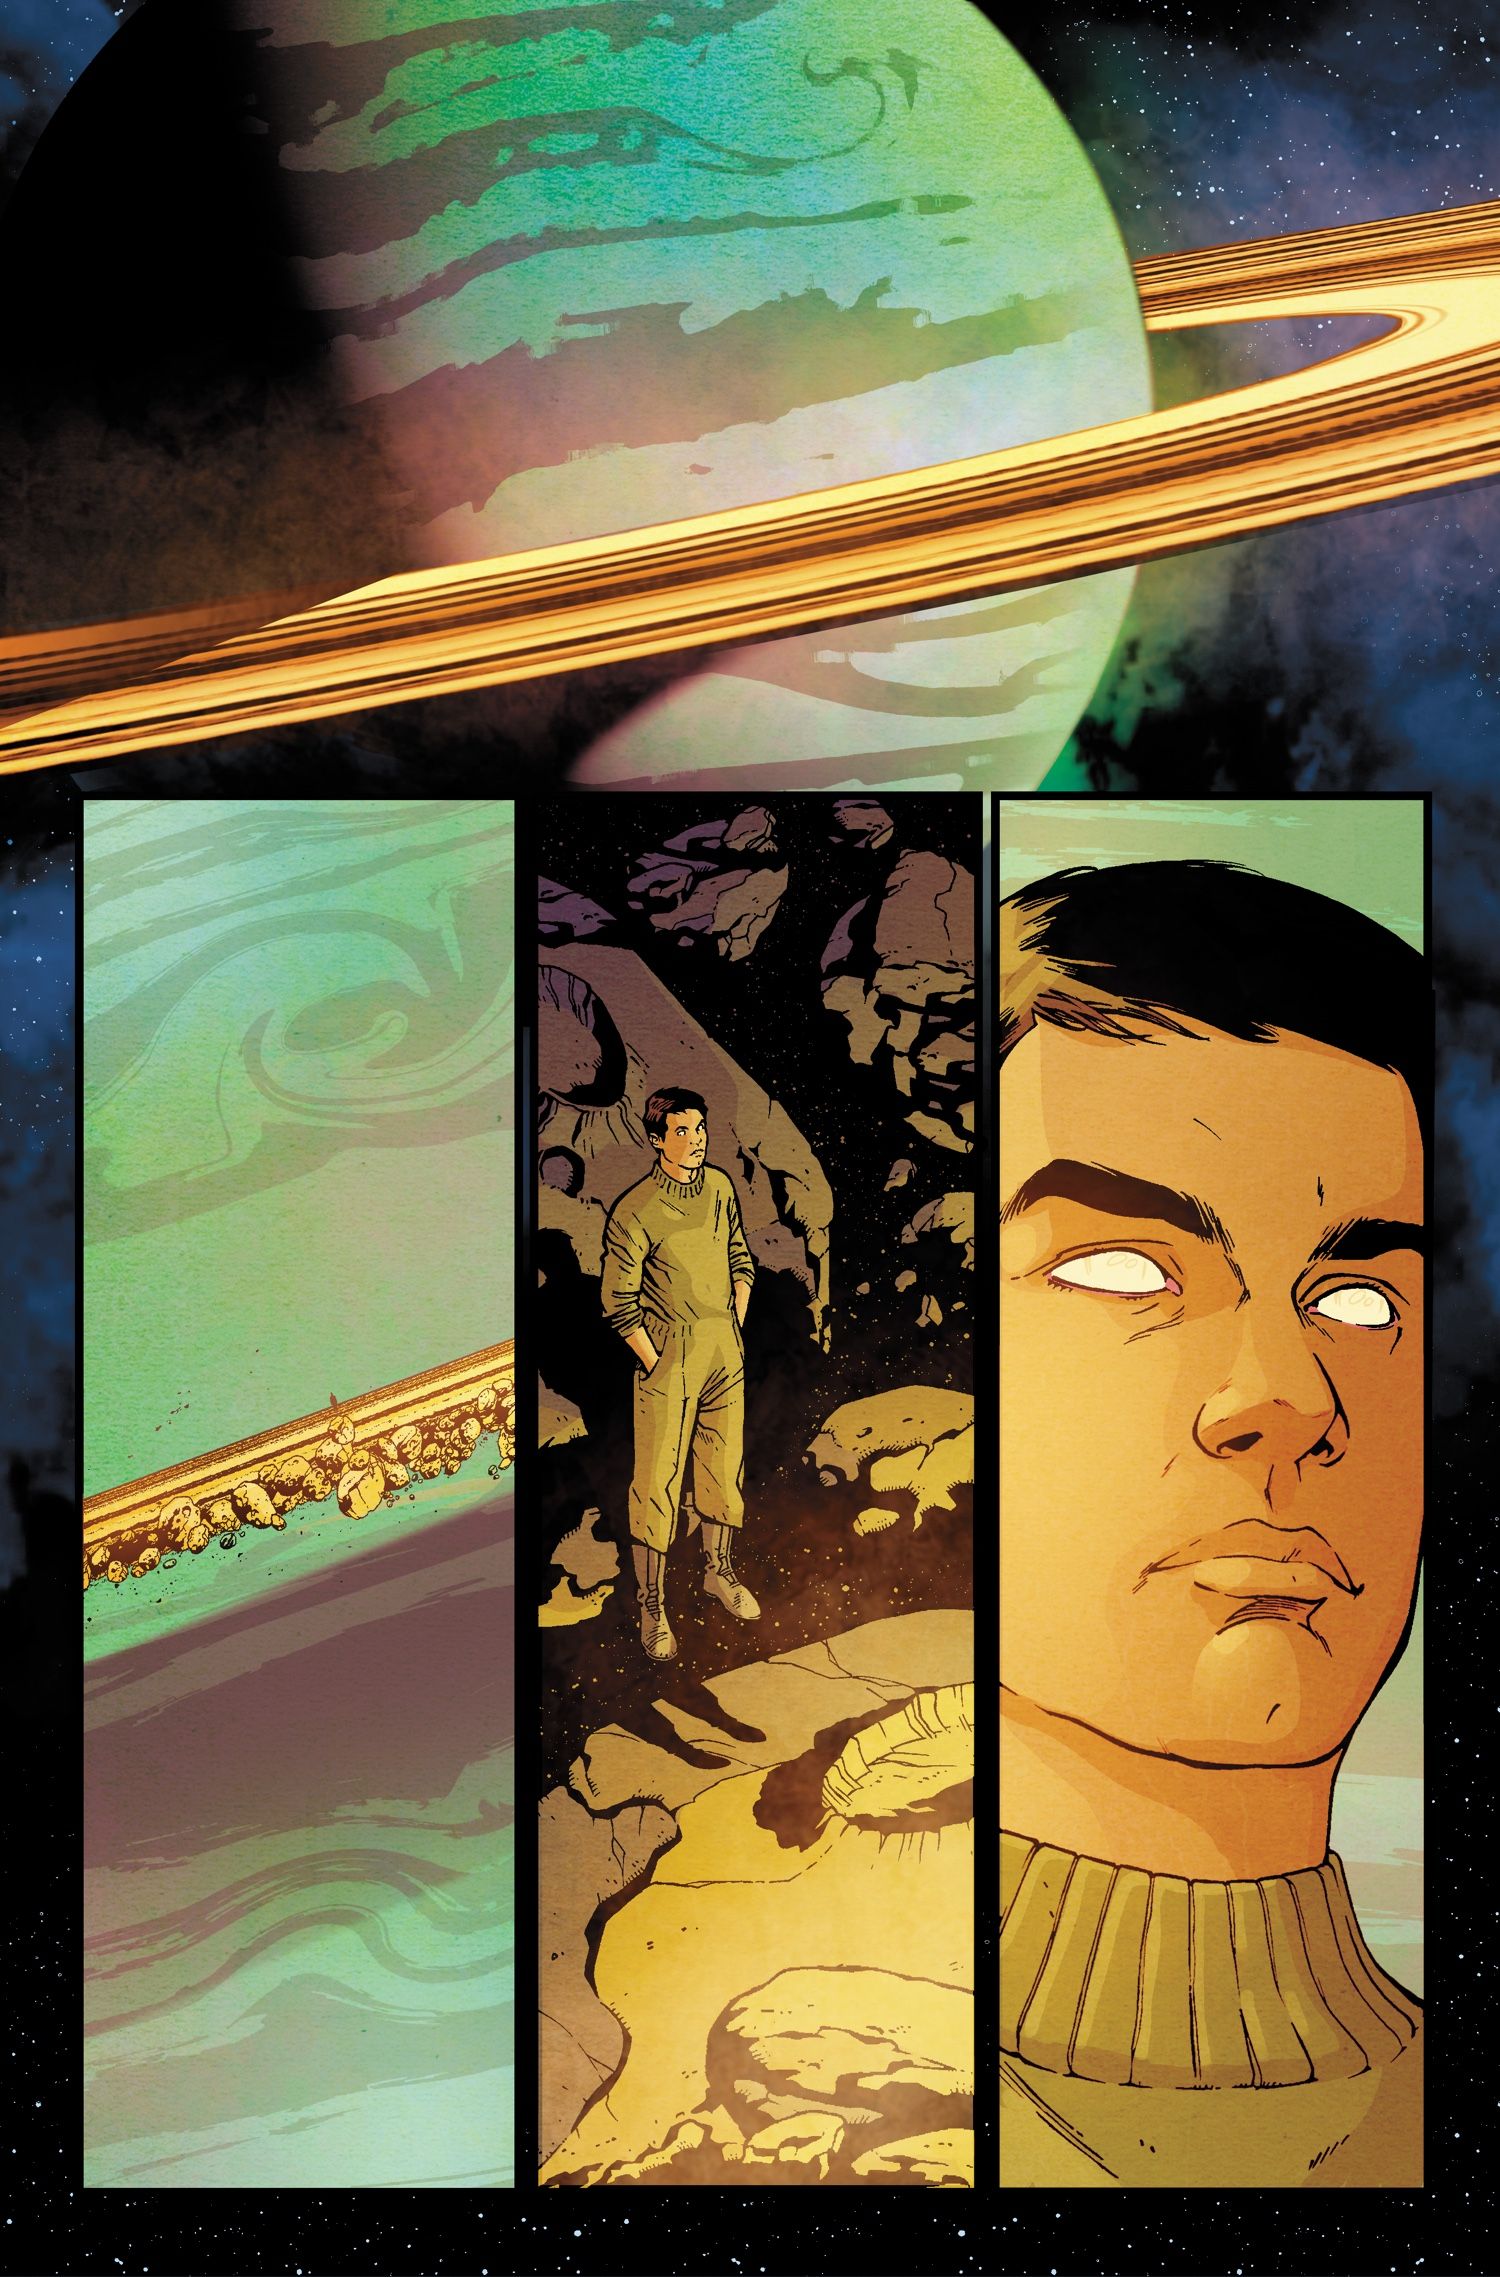 Star Trek #1 Prelude Art from Star Trek #400 - Sample Page A by Ramon Rosanas and Lee Loughridge (1)